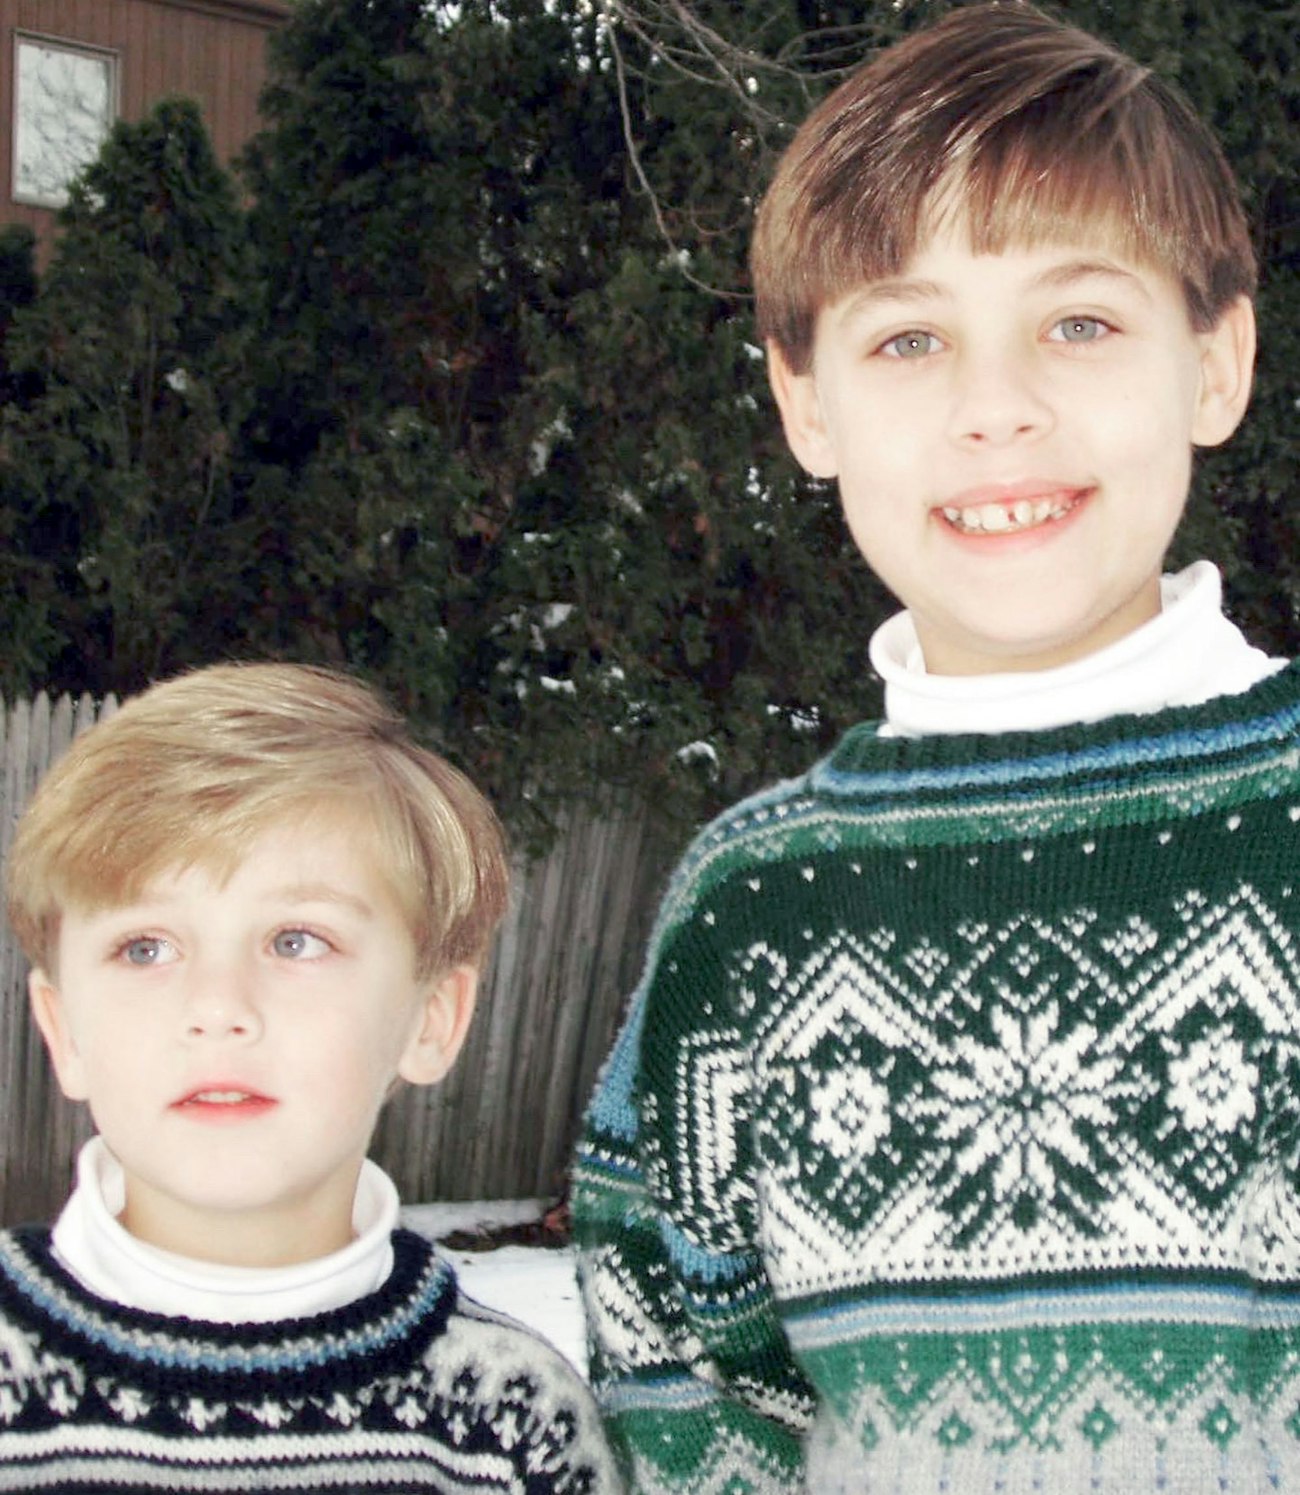 The annual Norwegian colorwork sweaters knitted by Pat Olski for her sons. Photo by Pat Olski